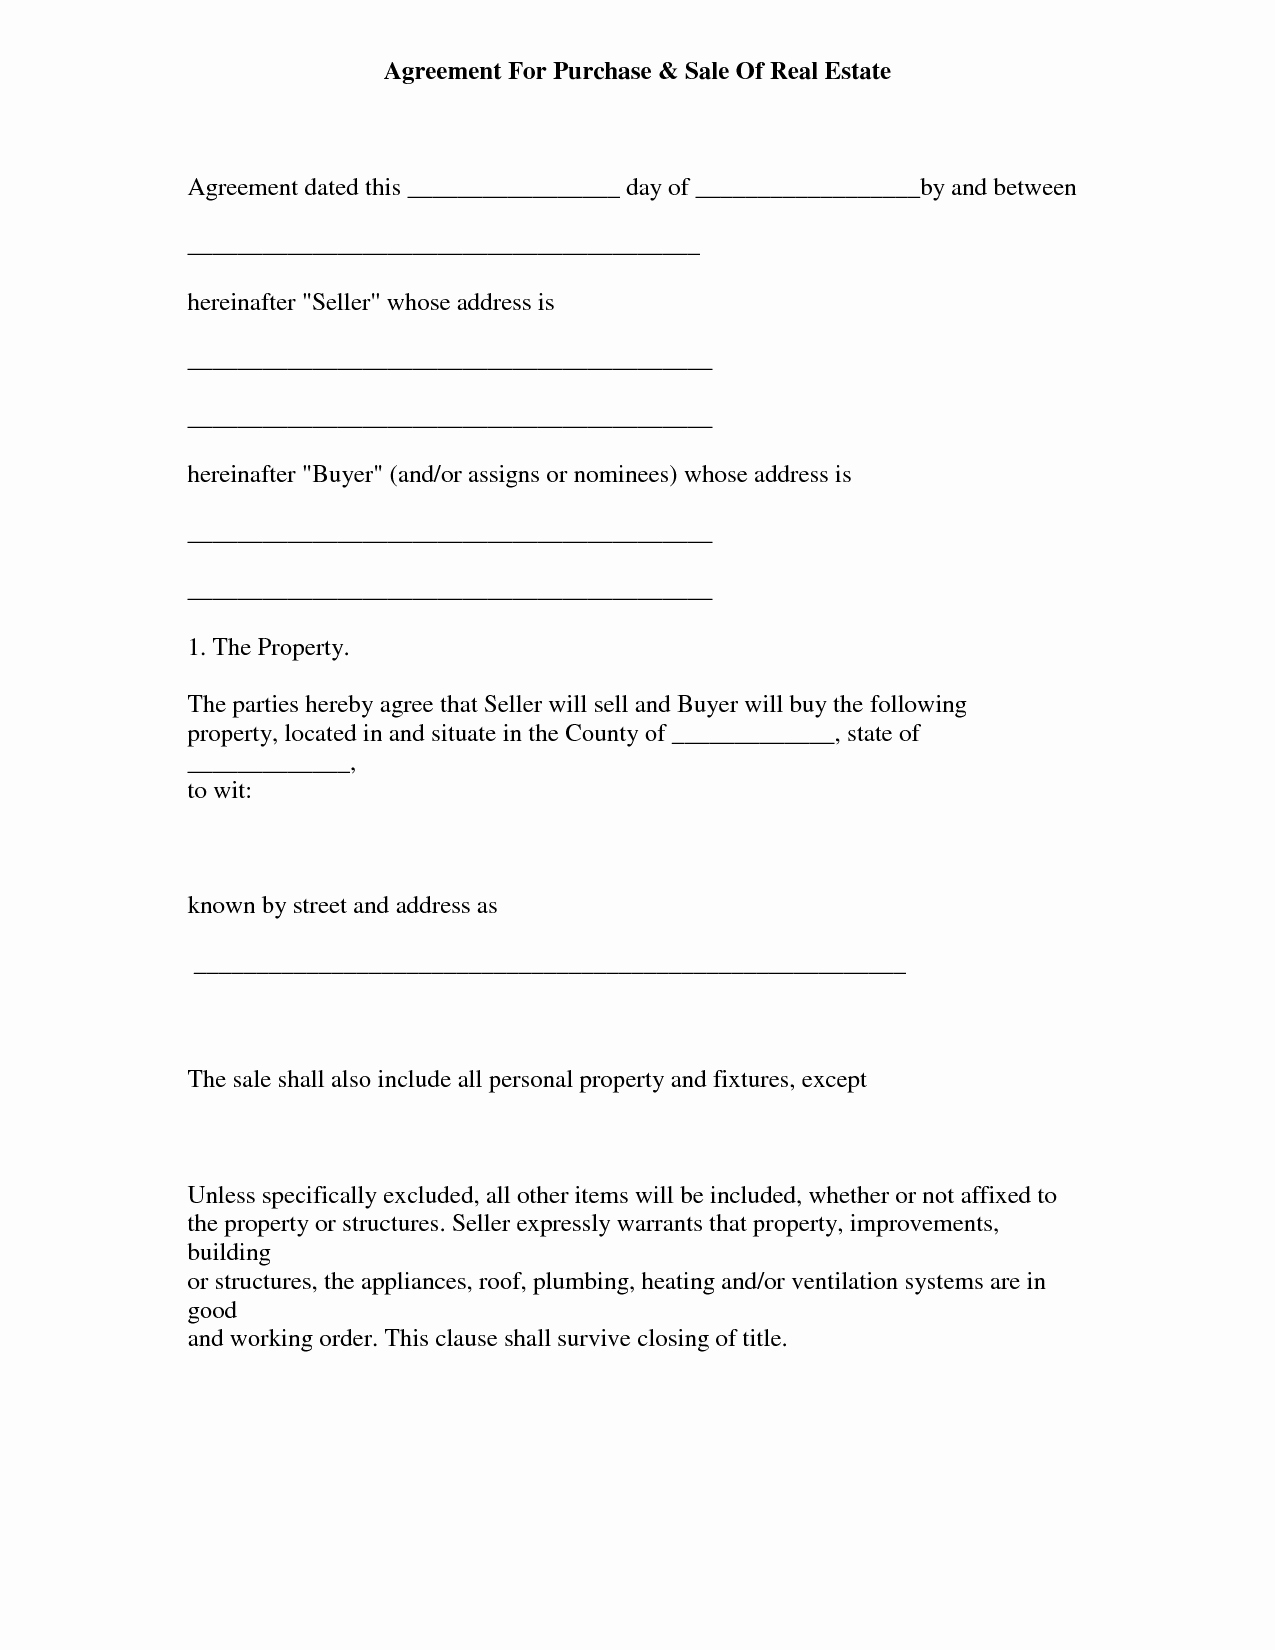 Simple Home Purchase Agreement Awesome Simple Land Purchase Agreement form